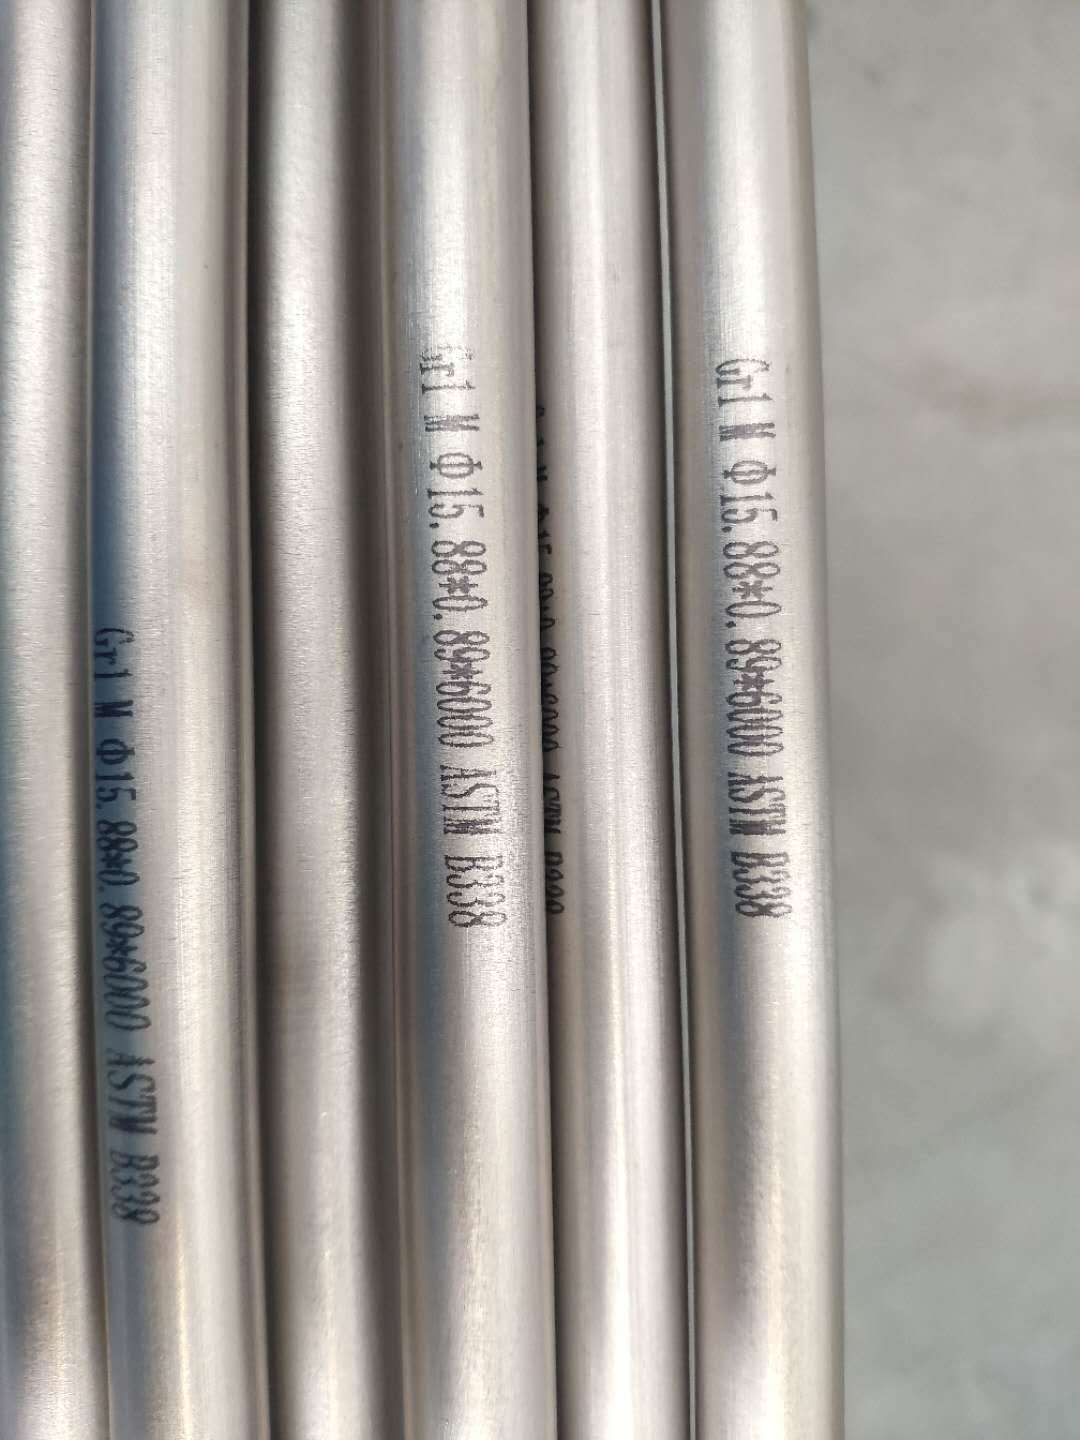 Seamless titanium tubes are widely used